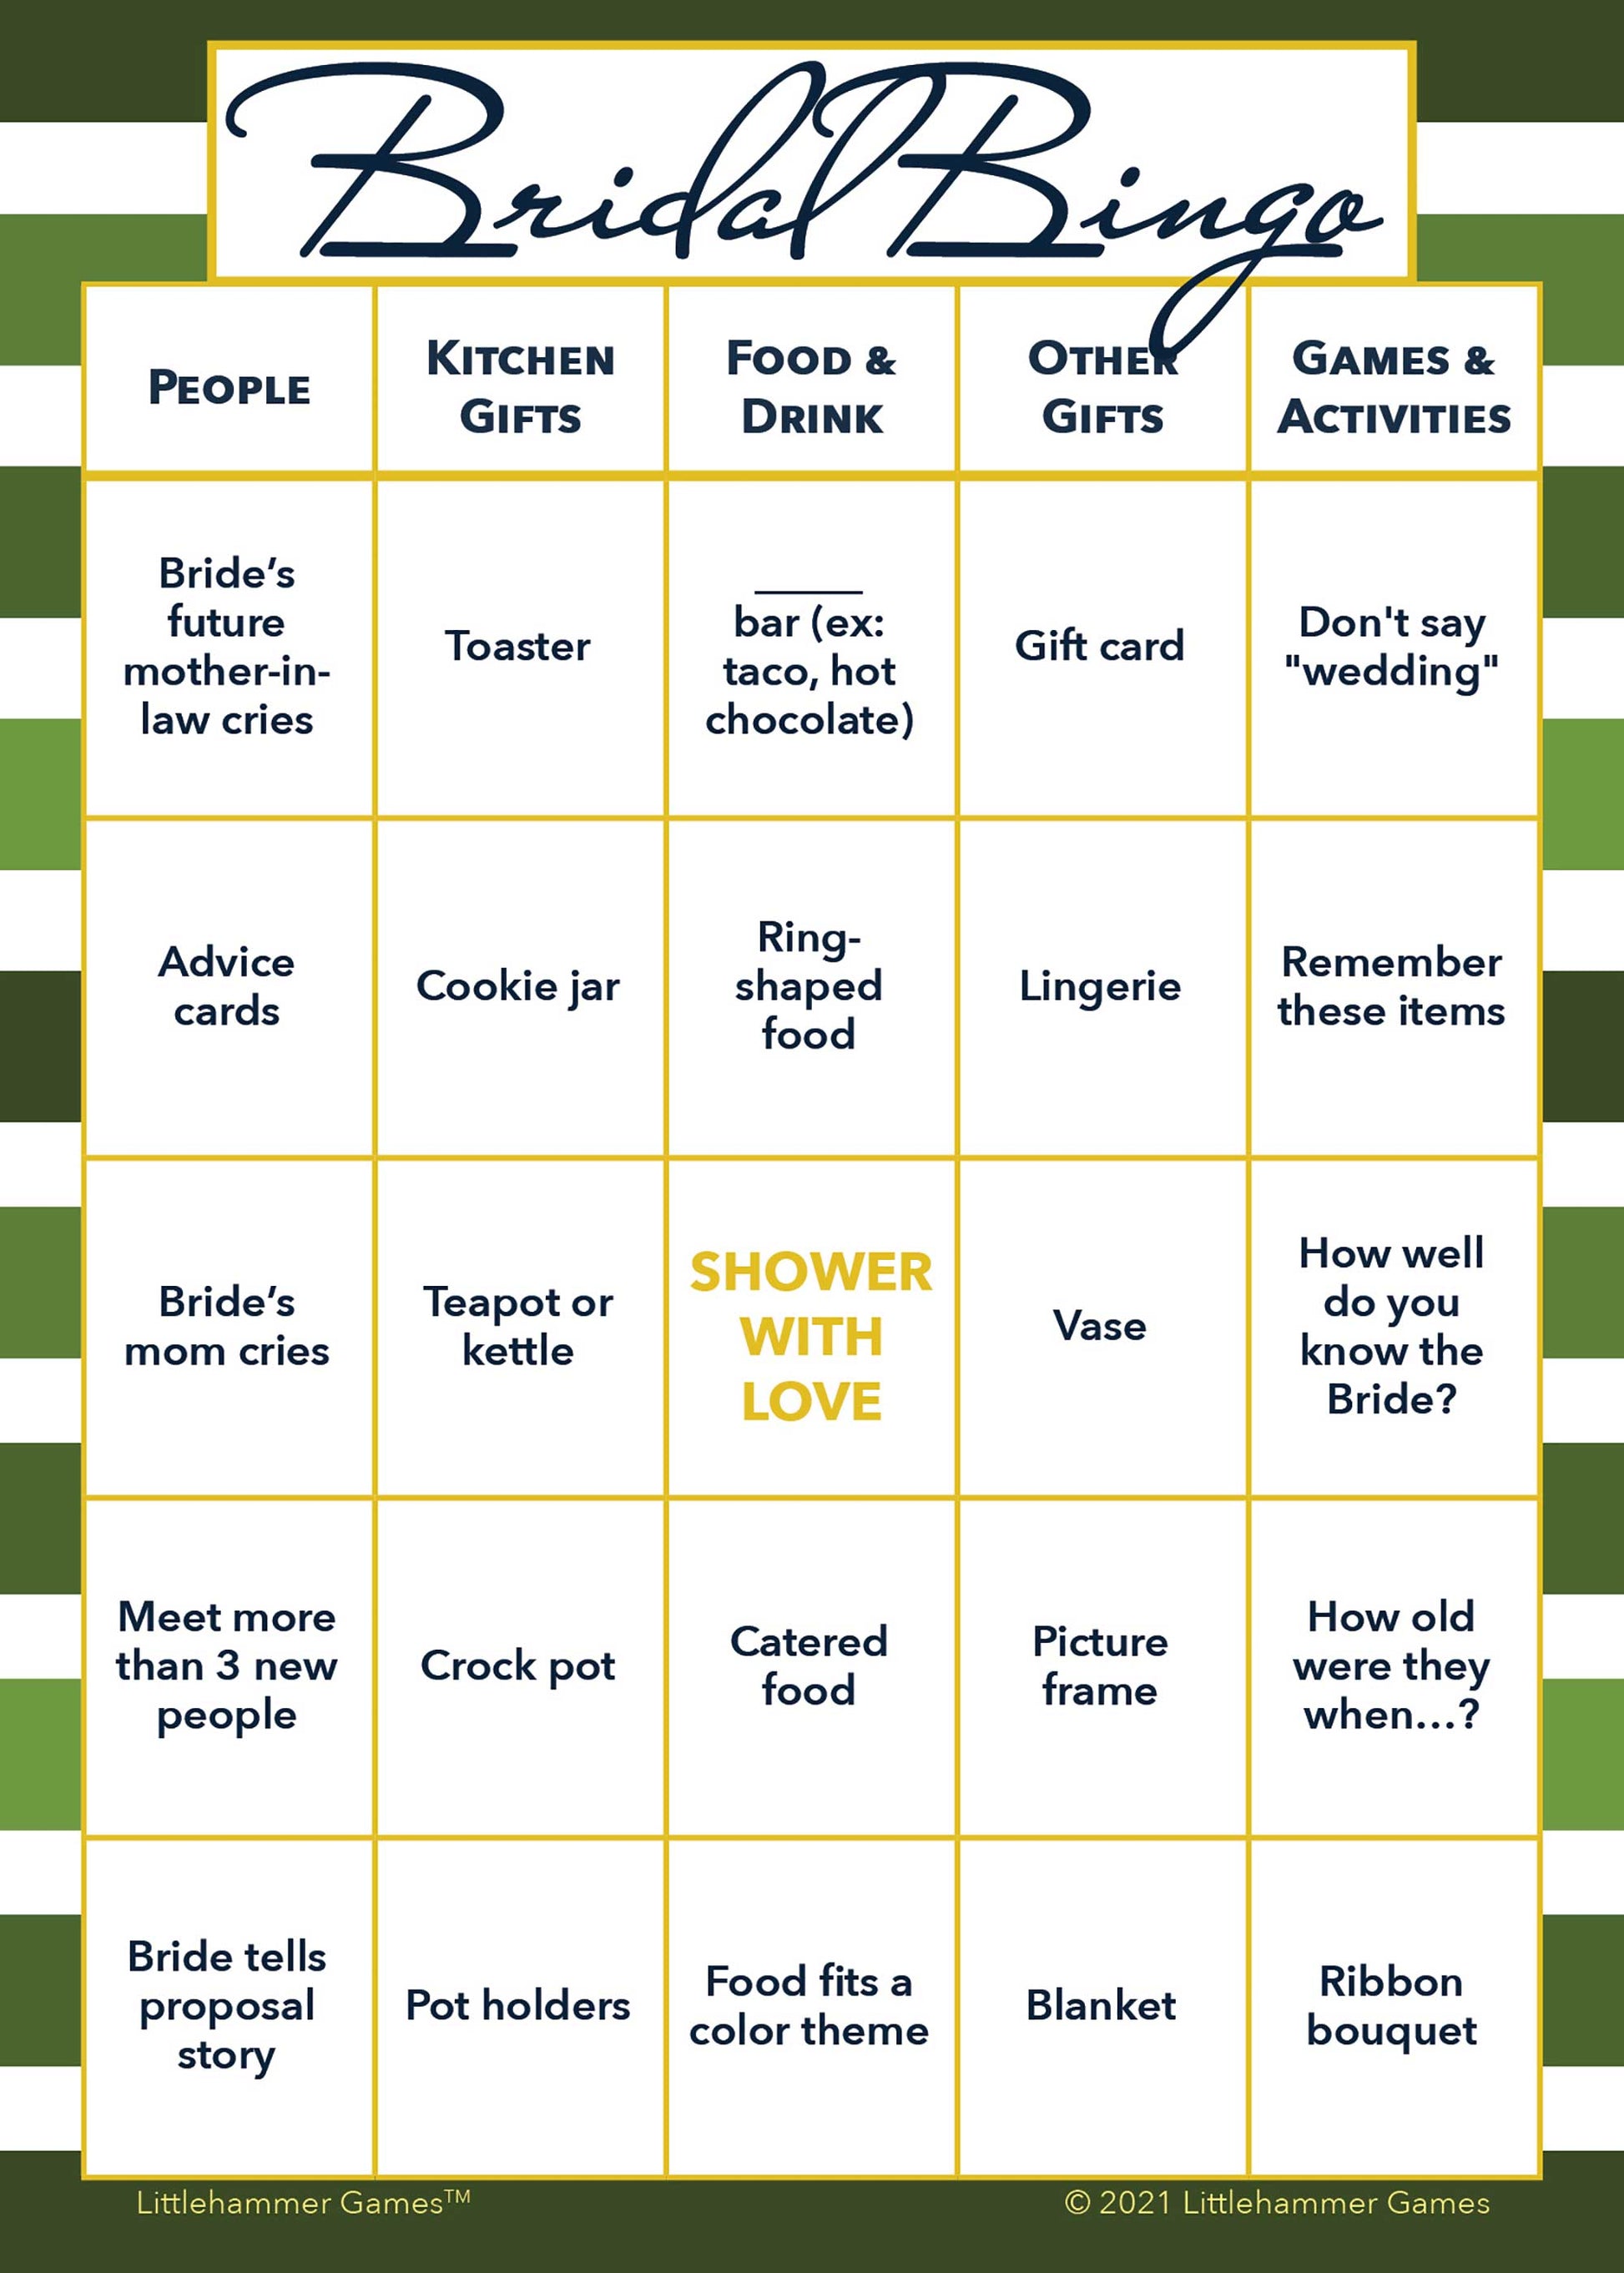 Bridal Bingo game card with a green-striped background